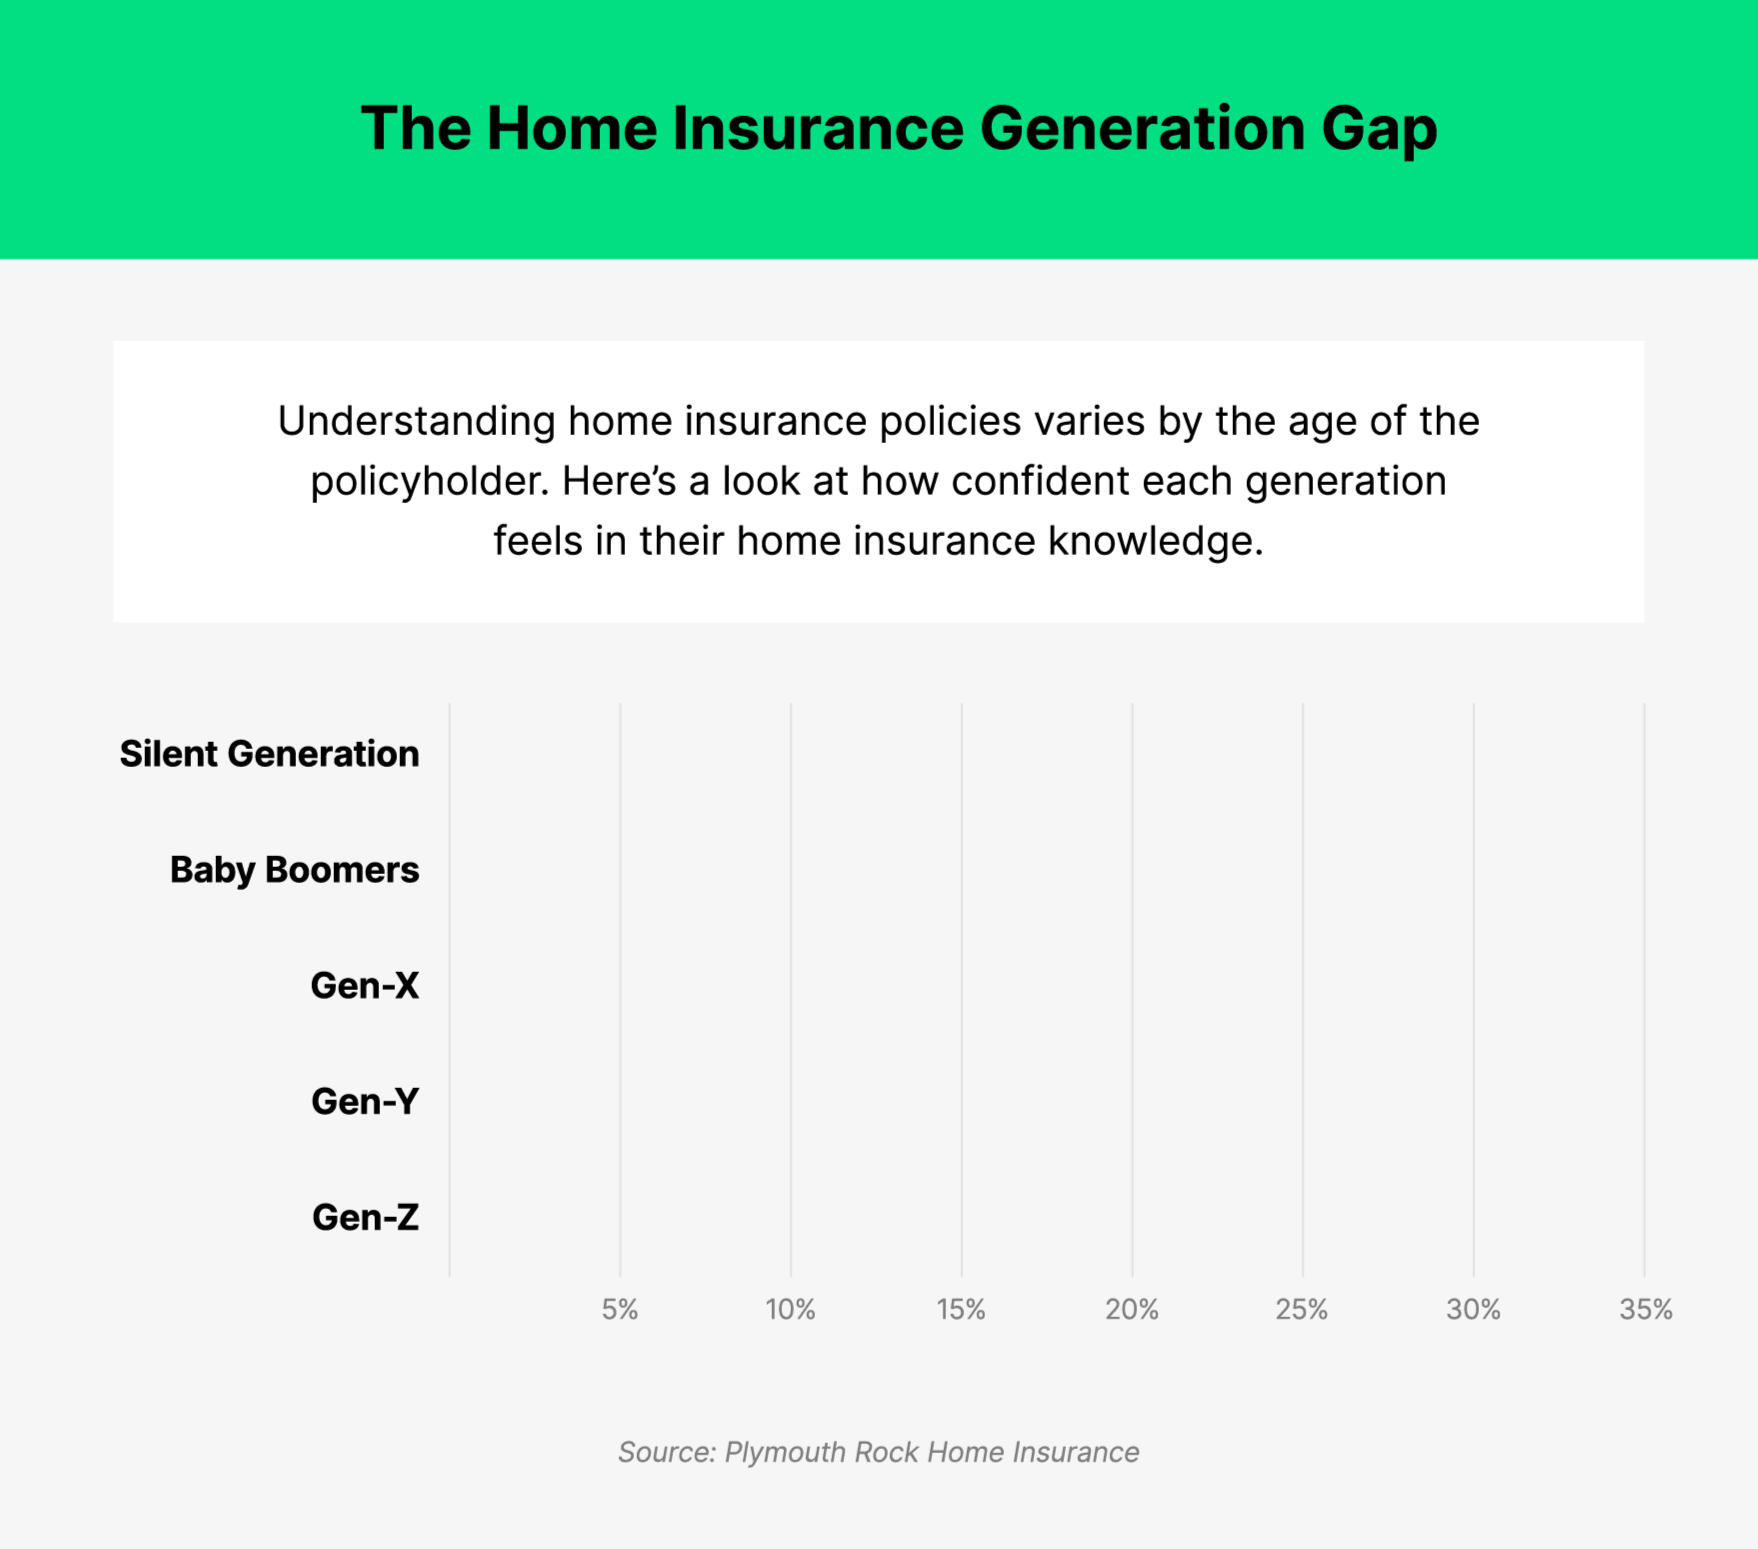 Understanding of home insurance policies varies by age group